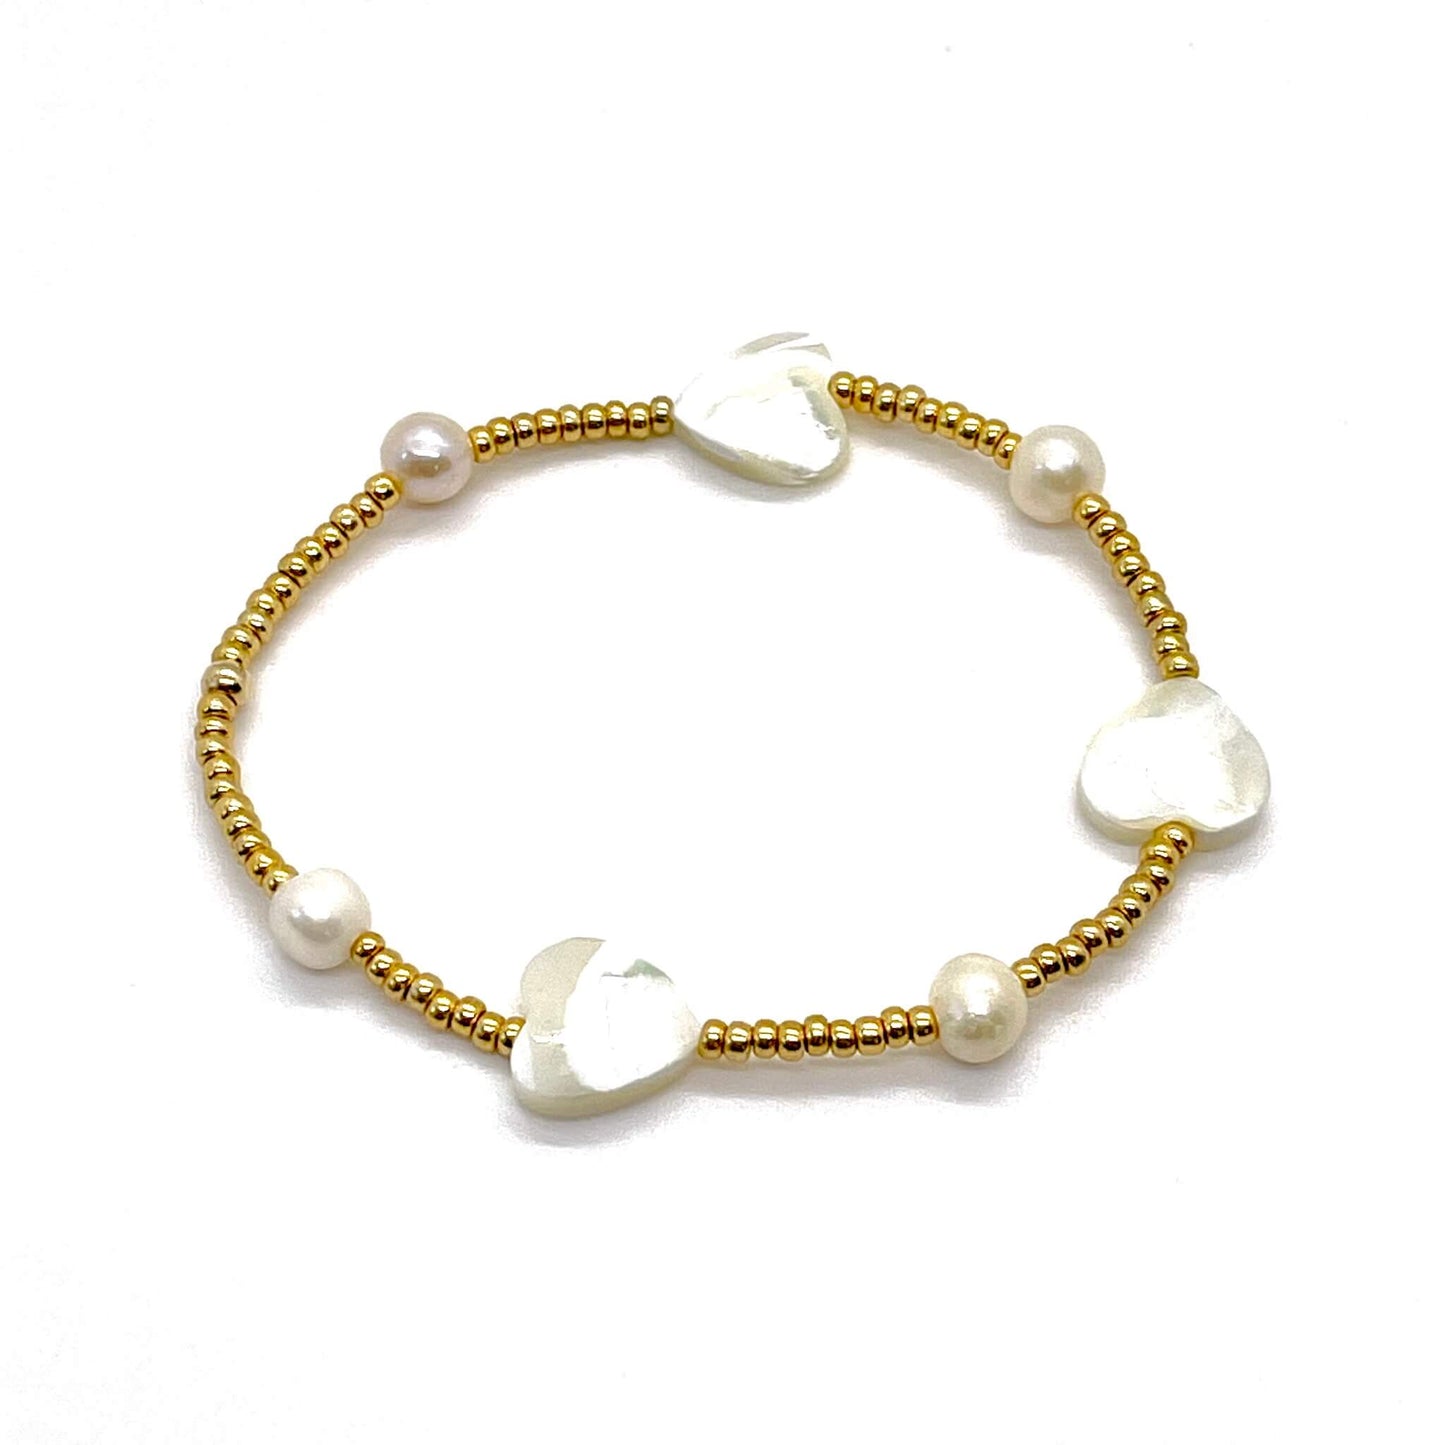 Mother-of-pearl heart bracelet with tiny gold-tone beads, freshwater rondelle beads, and mother-of-pearl heart beads.